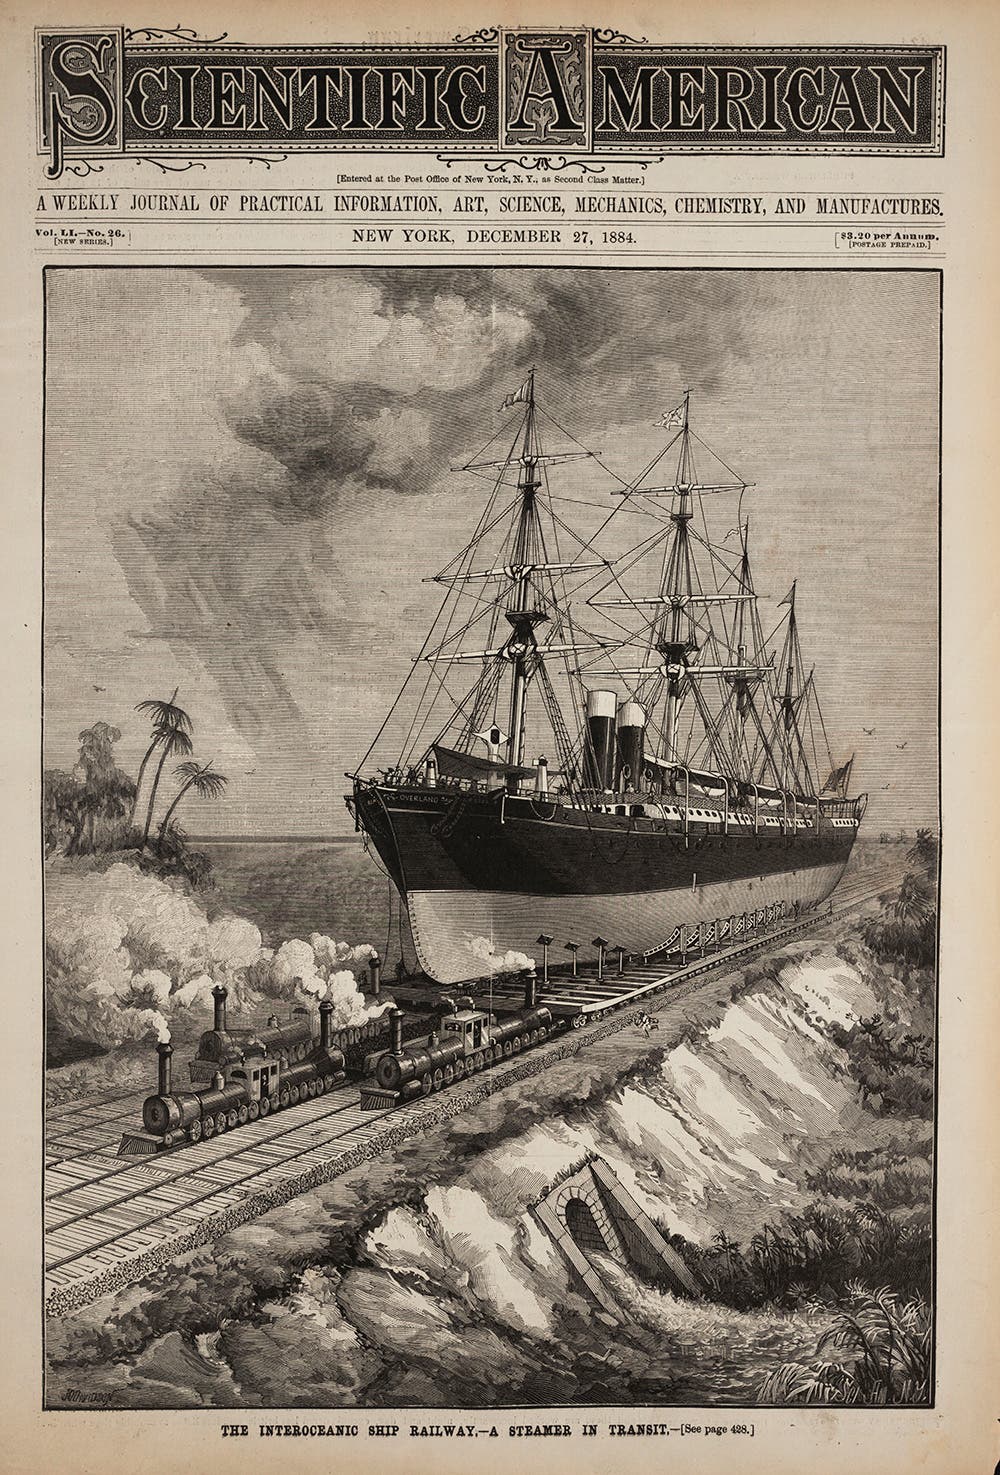 A steamer in transit across the Isthmus of Tehuantepec in Mexico, as proposed by James B. Eads. From Scientific American, December 27, 1884.